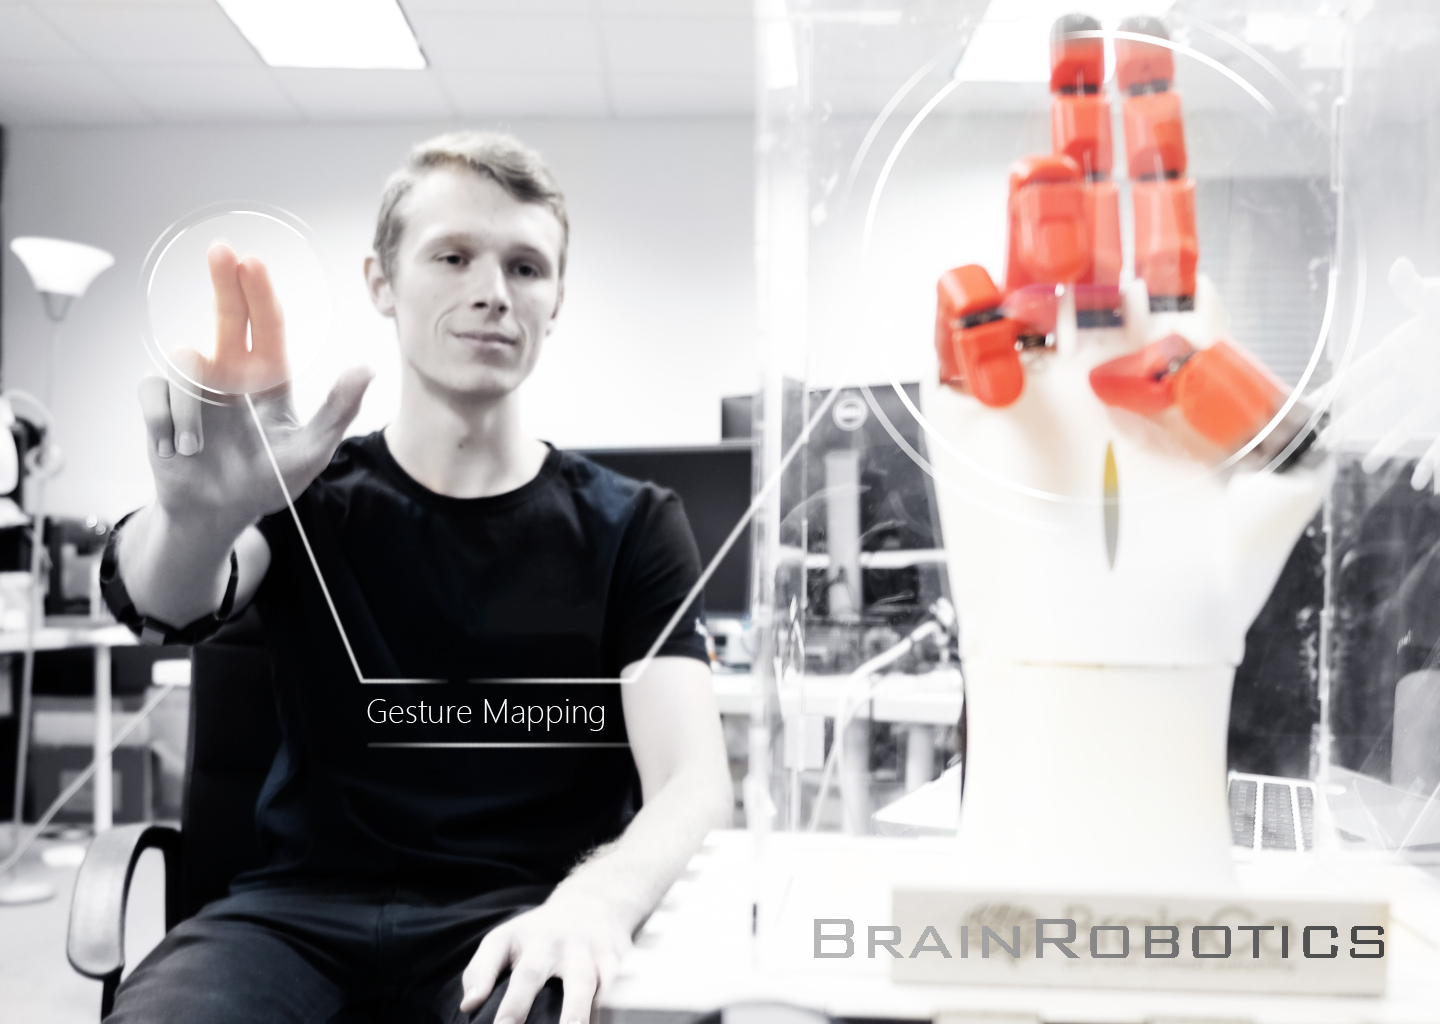 One of the Brain Robotics prosthetic hand featured at CES 2019. 